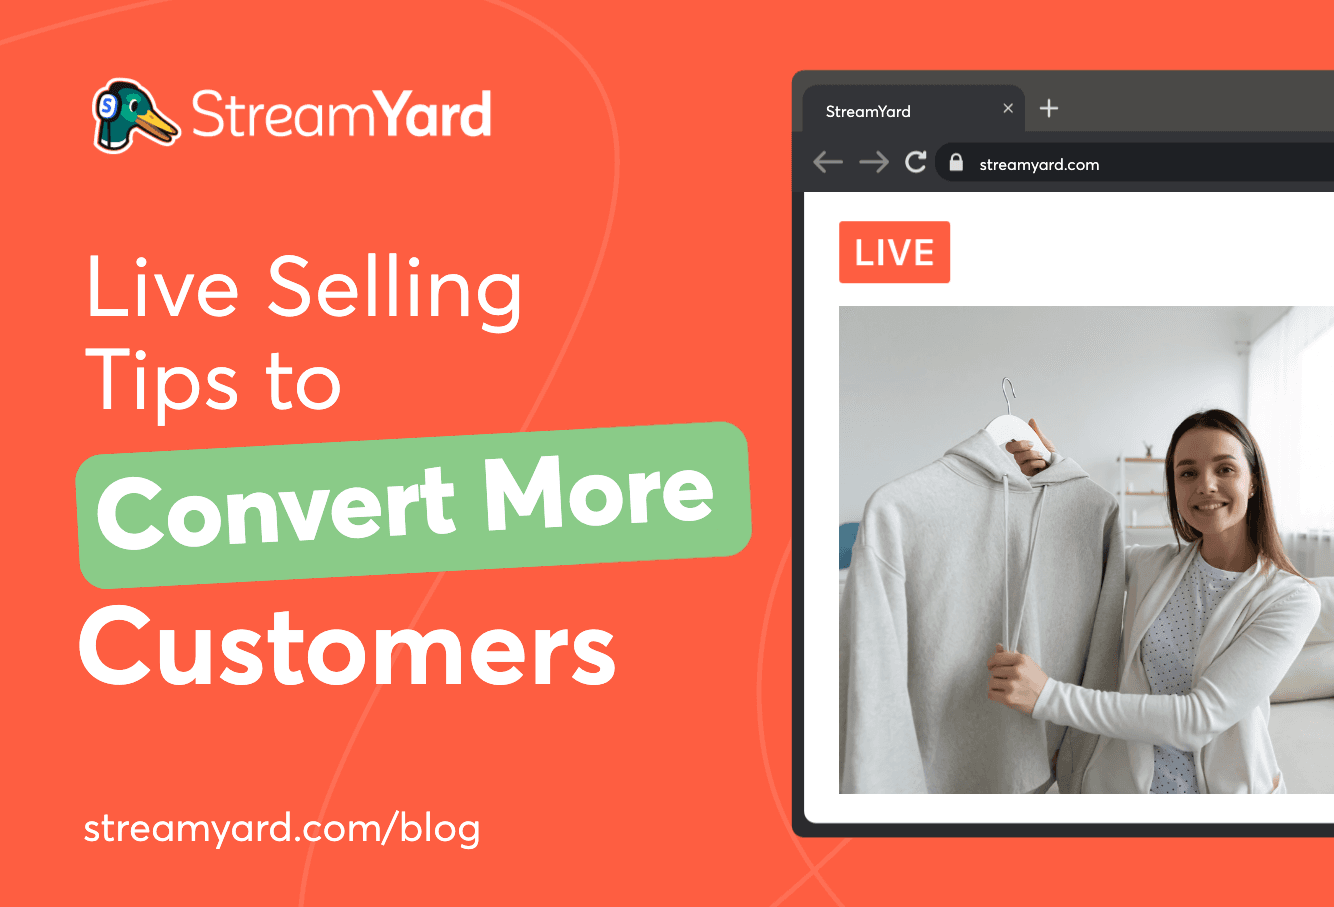 Check out this guide for some of the top live selling tips that you can use to convert more shoppers into paying customers.